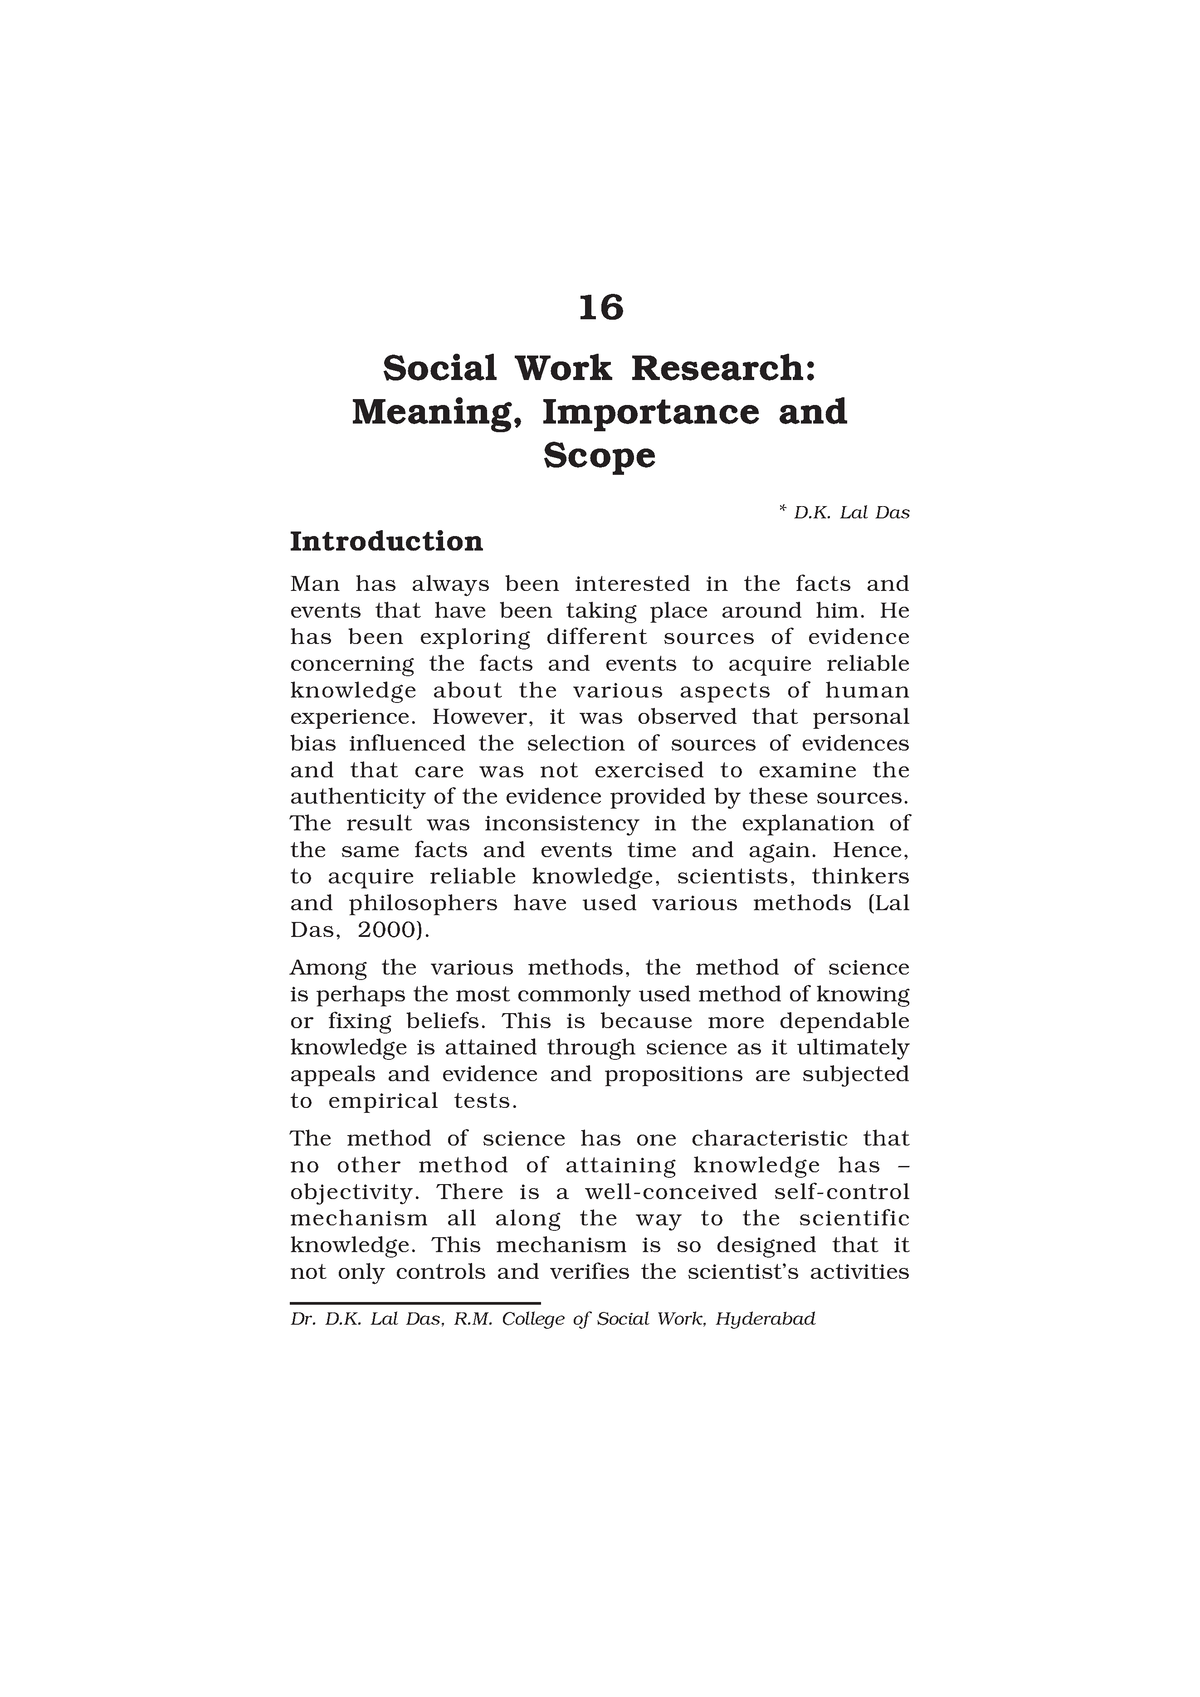 social work research meaning